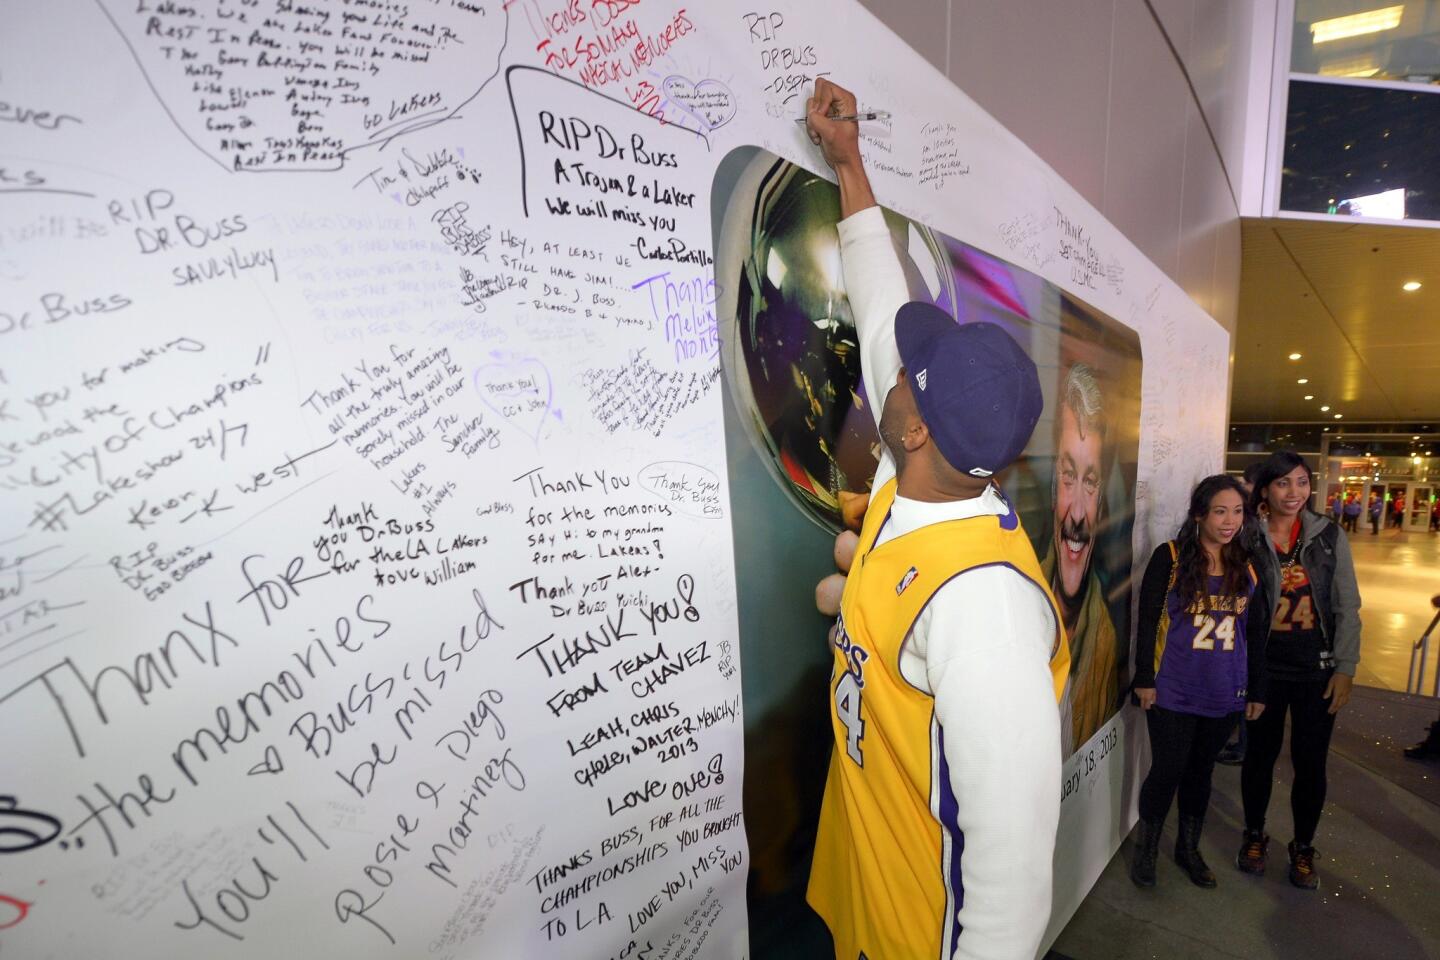 Lakers to add Jerry Buss memorial patch to jerseys - Sports